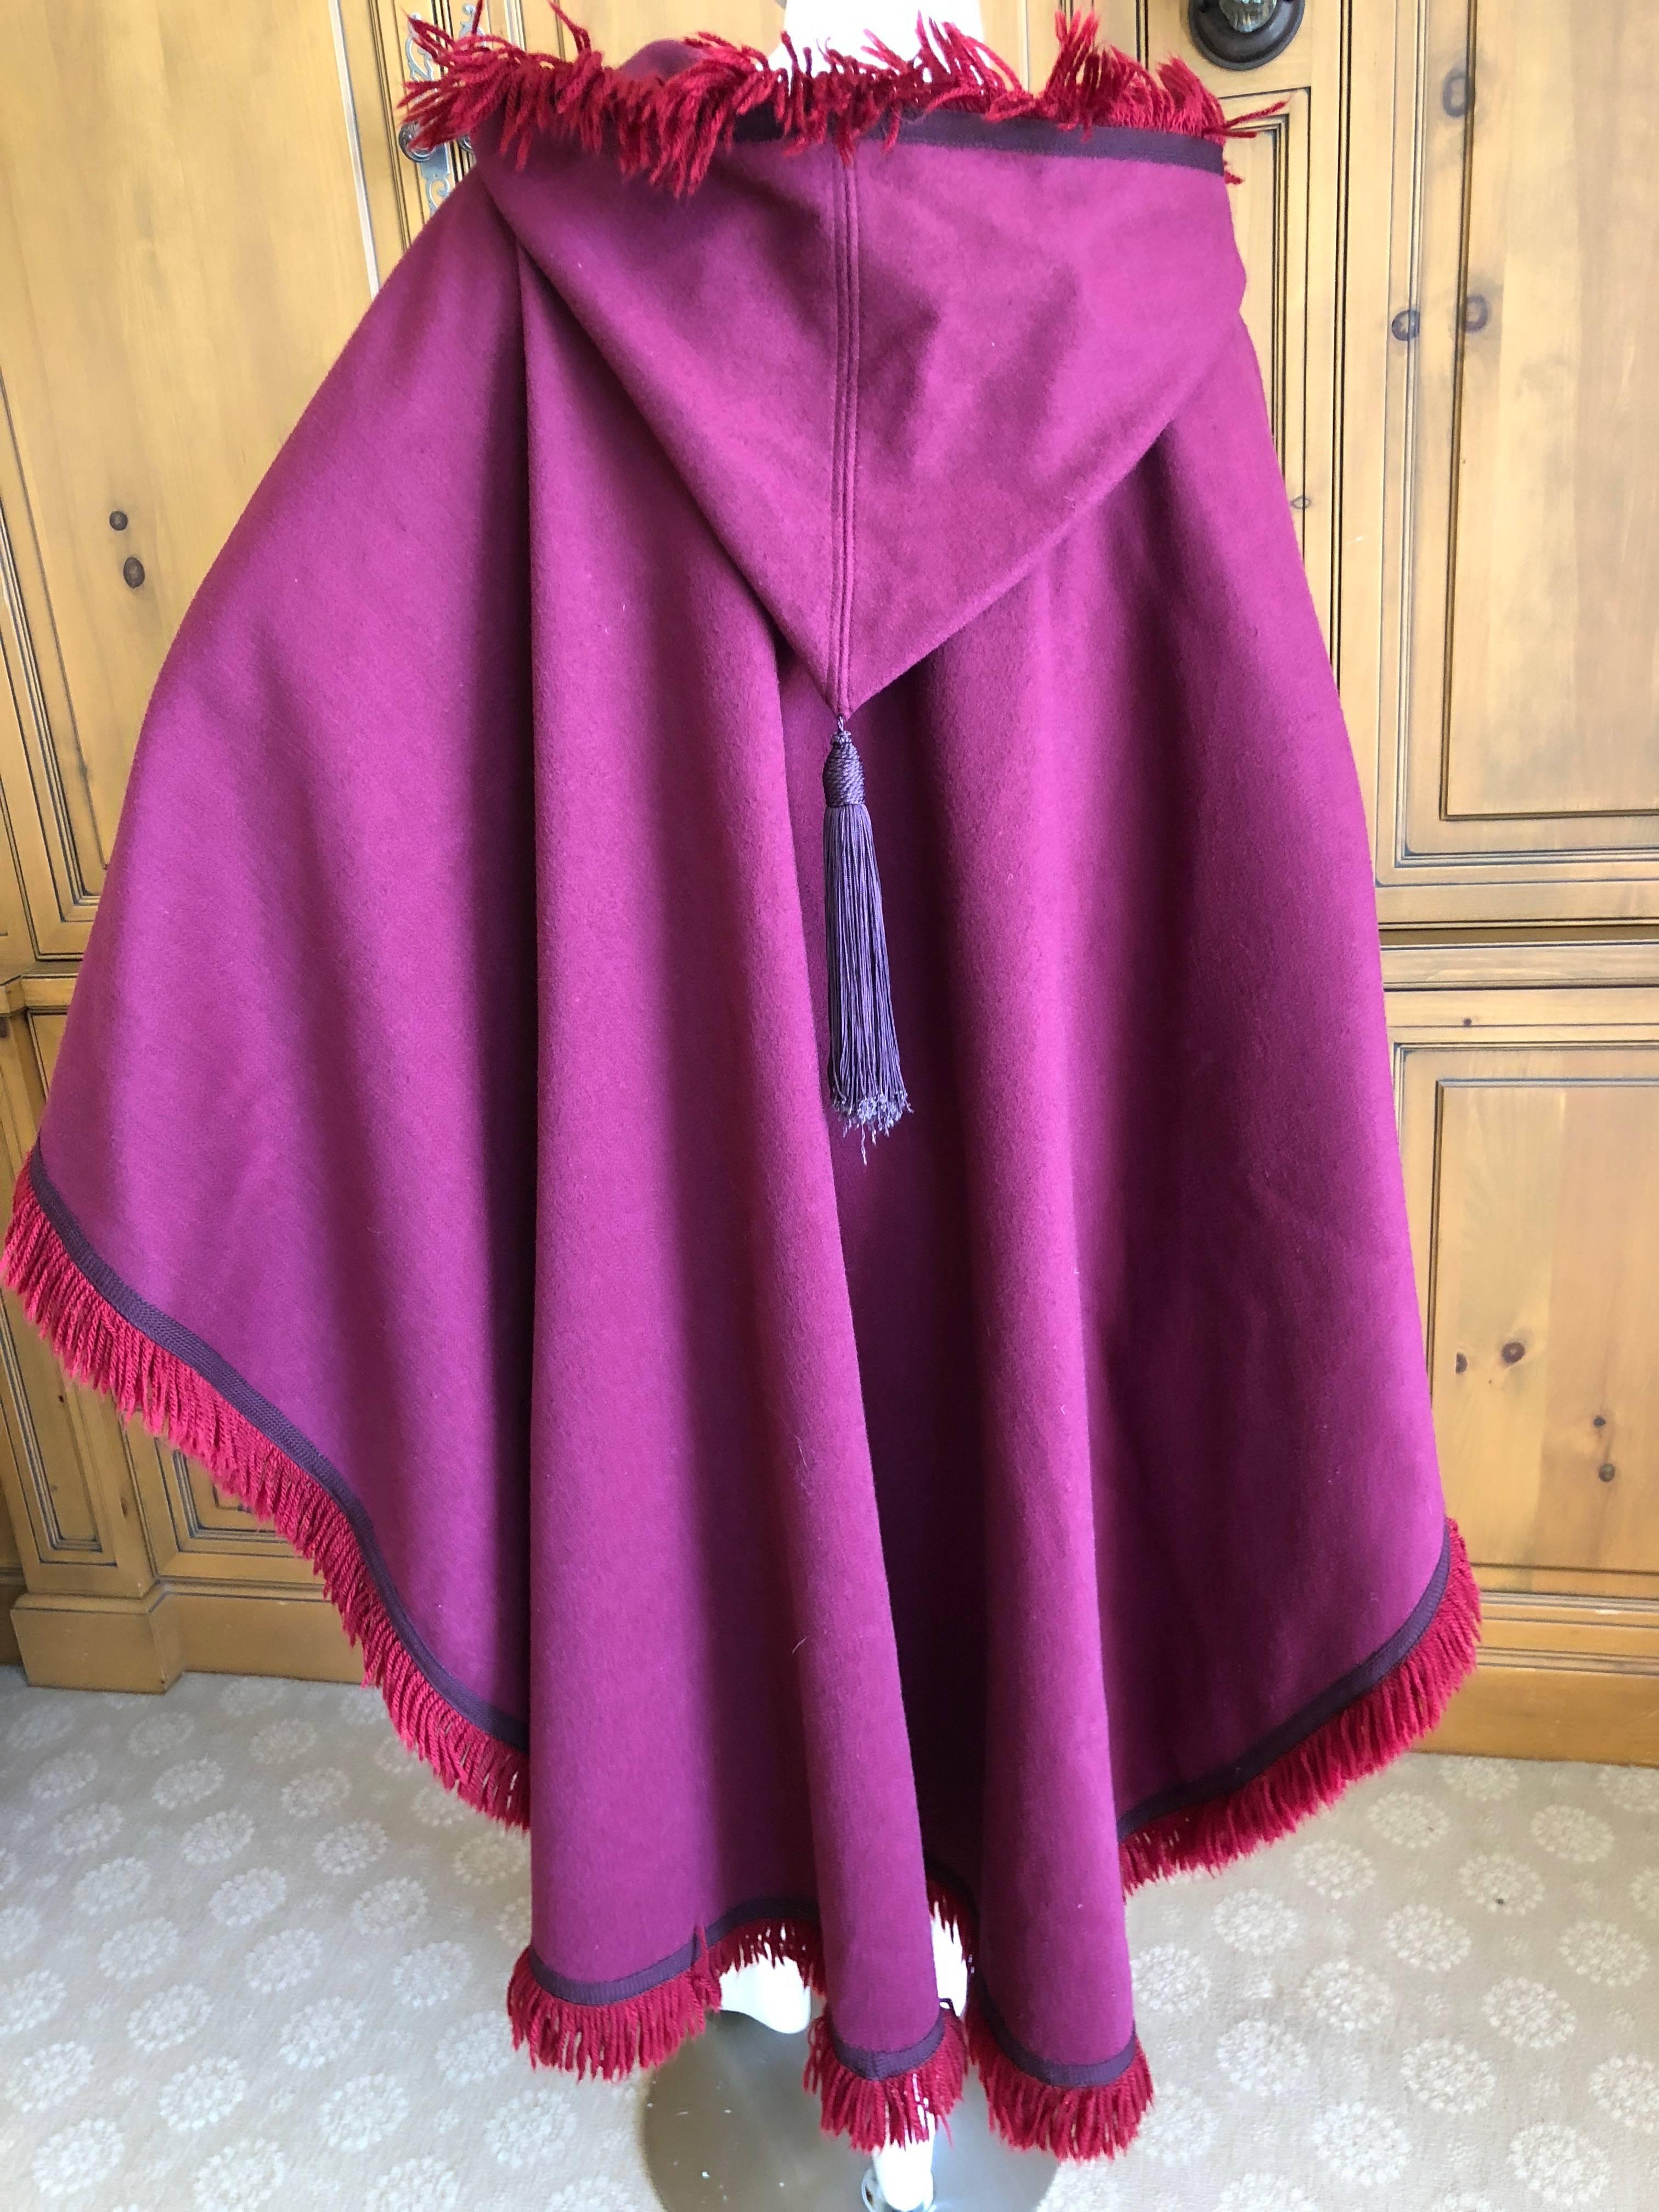 Yves Saint Laurent Rive Gauche Fringed Fuchsia Cape with Hood and Tassel For Sale 2